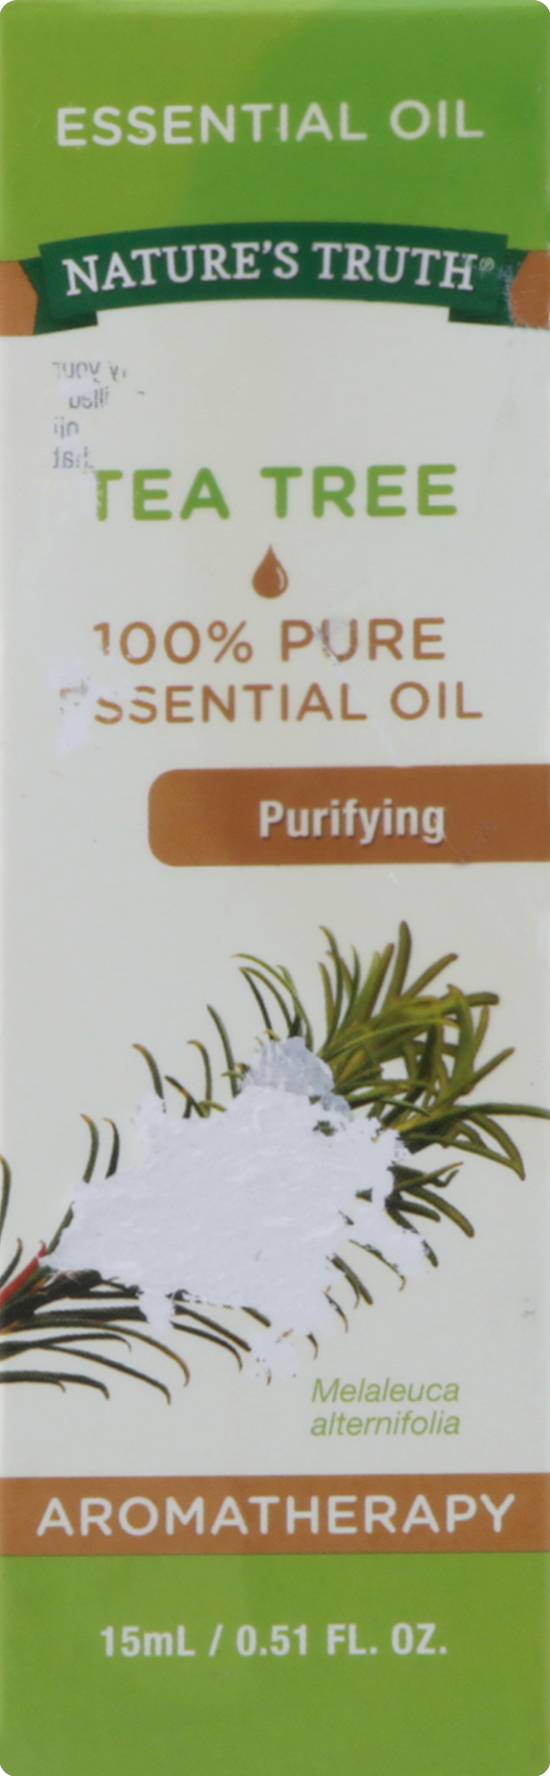 Essential Oil Nature's Truth Tea Tree Purifying Essential Oil